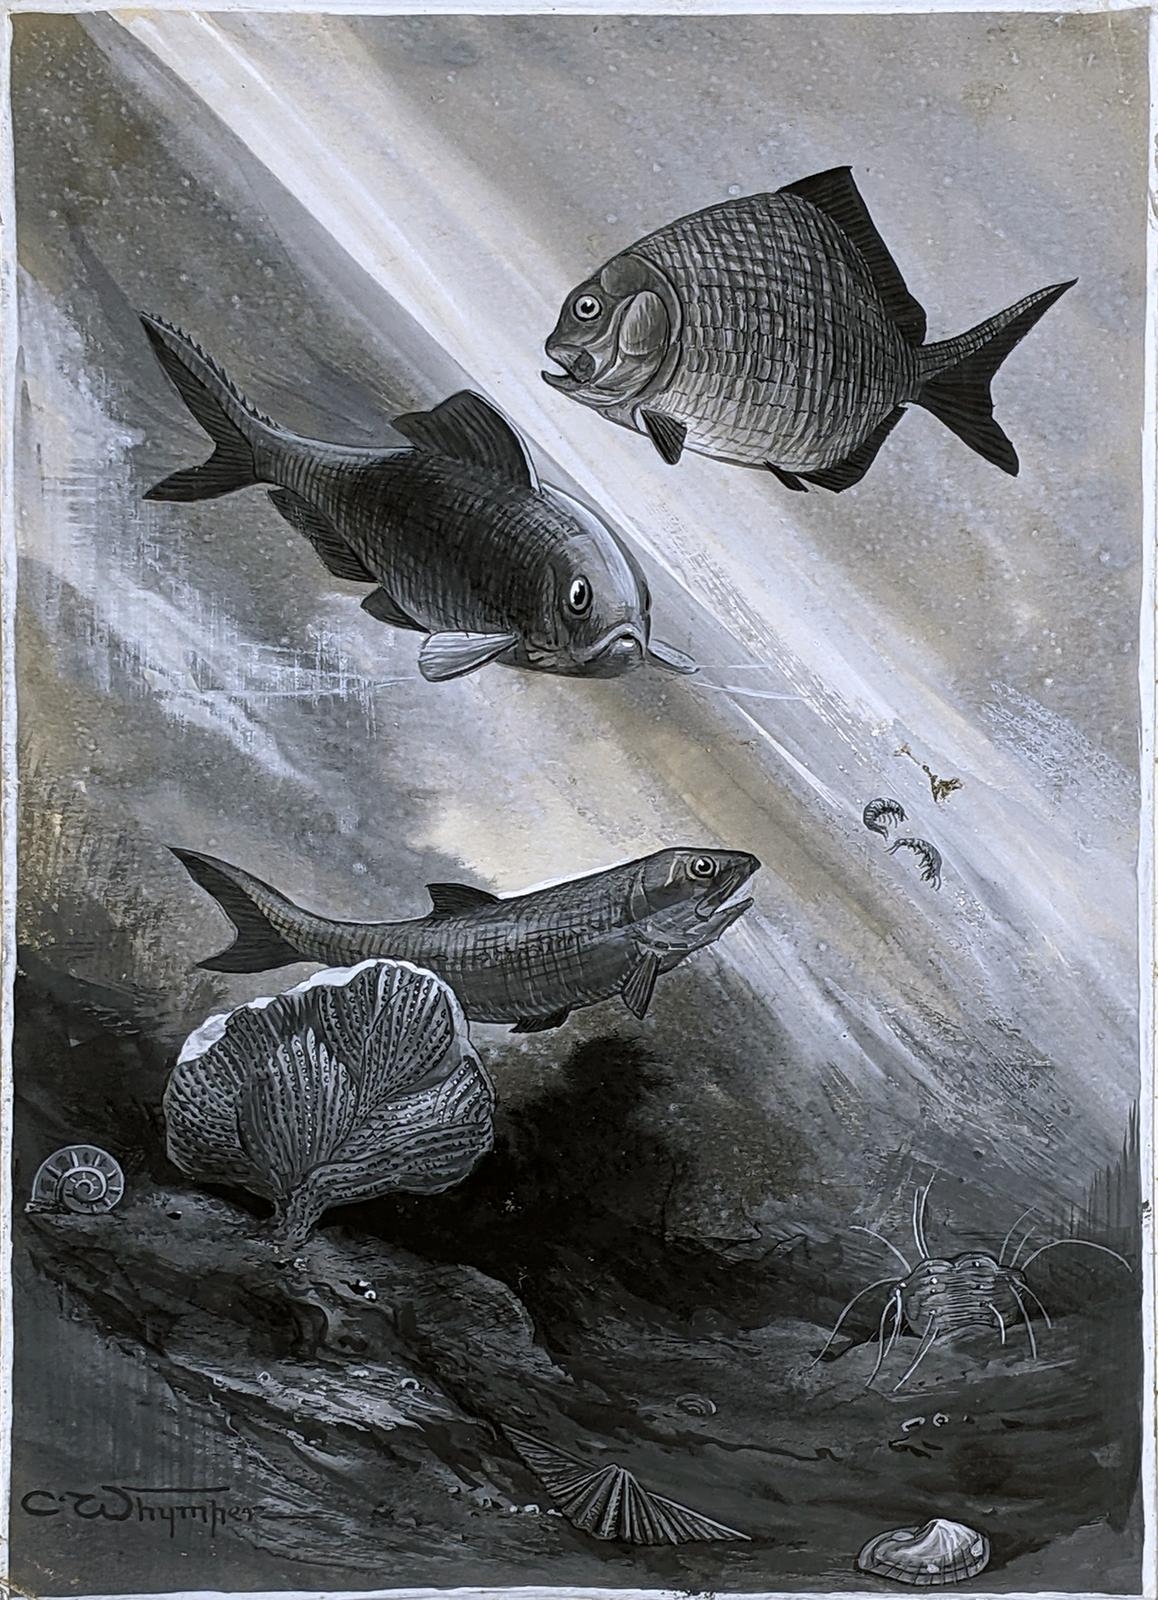 Artwork by Charles Whymper, Fishes of the Permian Period (Amblypterus, Palaeoniscus, Polyzoa, Ammonoid, Lampshell, Platysomus, Schizodus), Made of pen, ink and grey wash, heightened in white